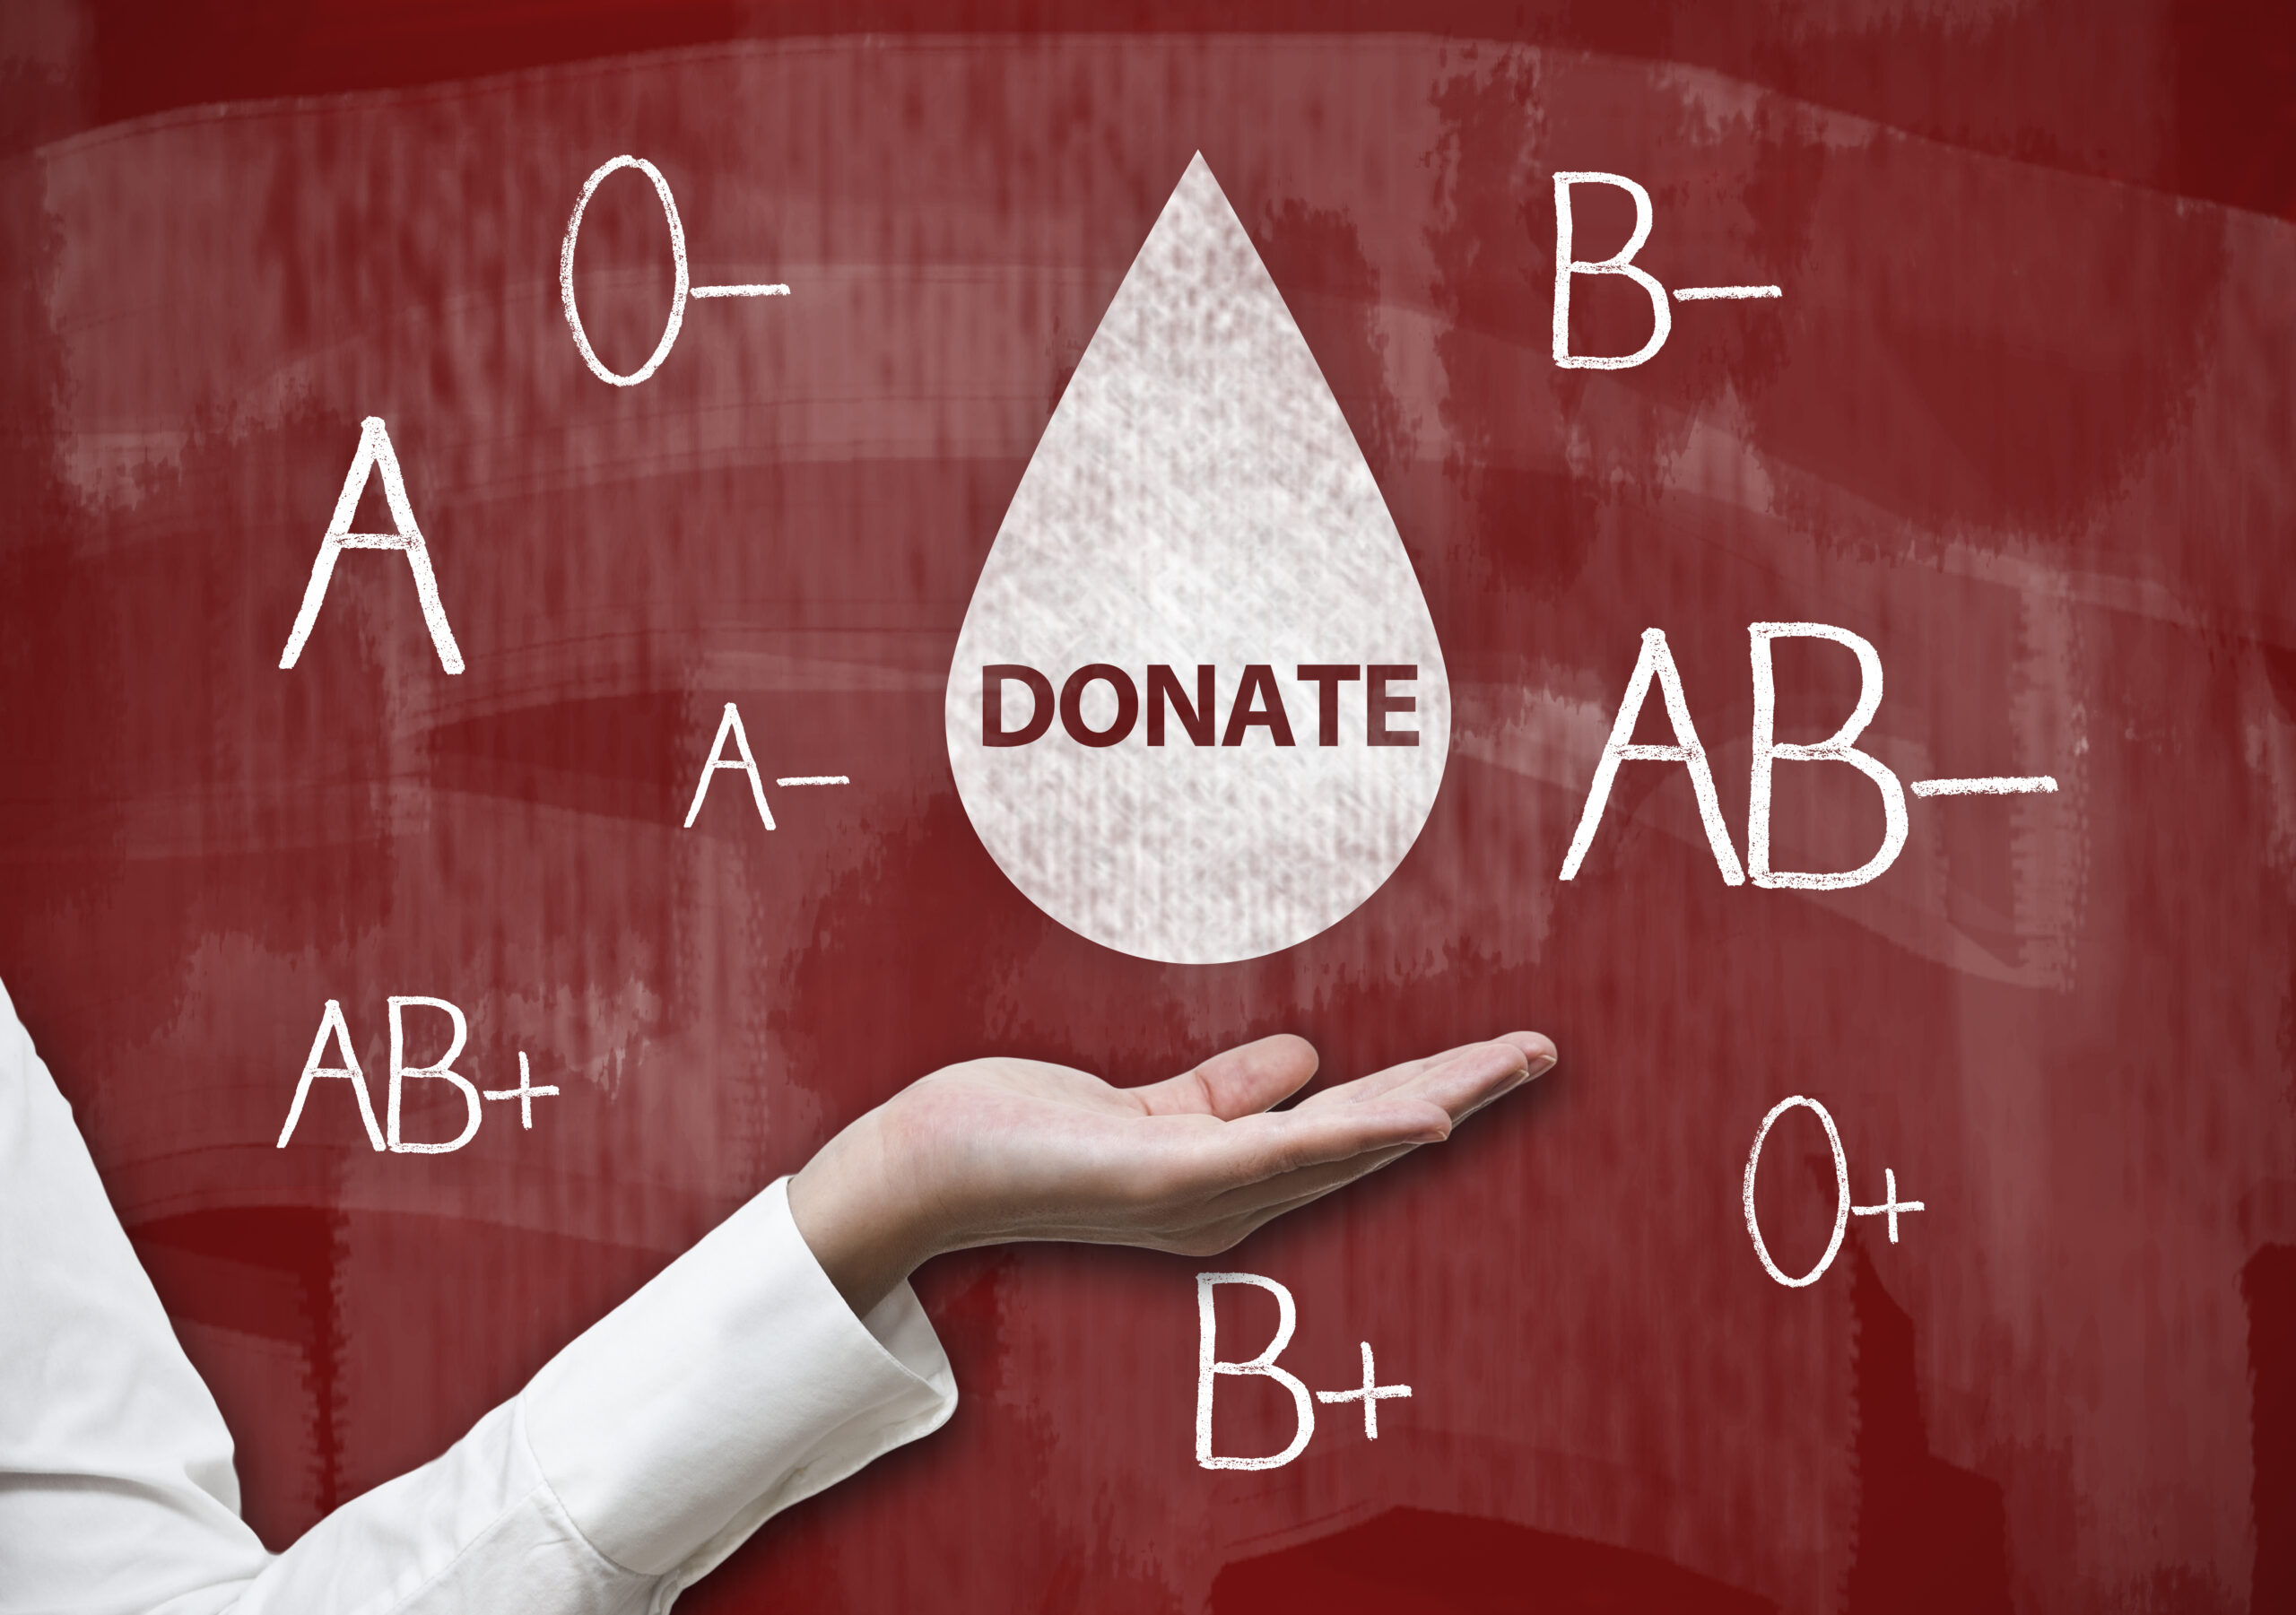 <h1 class="tribe-events-single-event-title">Brooklyn Community Blood Drive</h1>